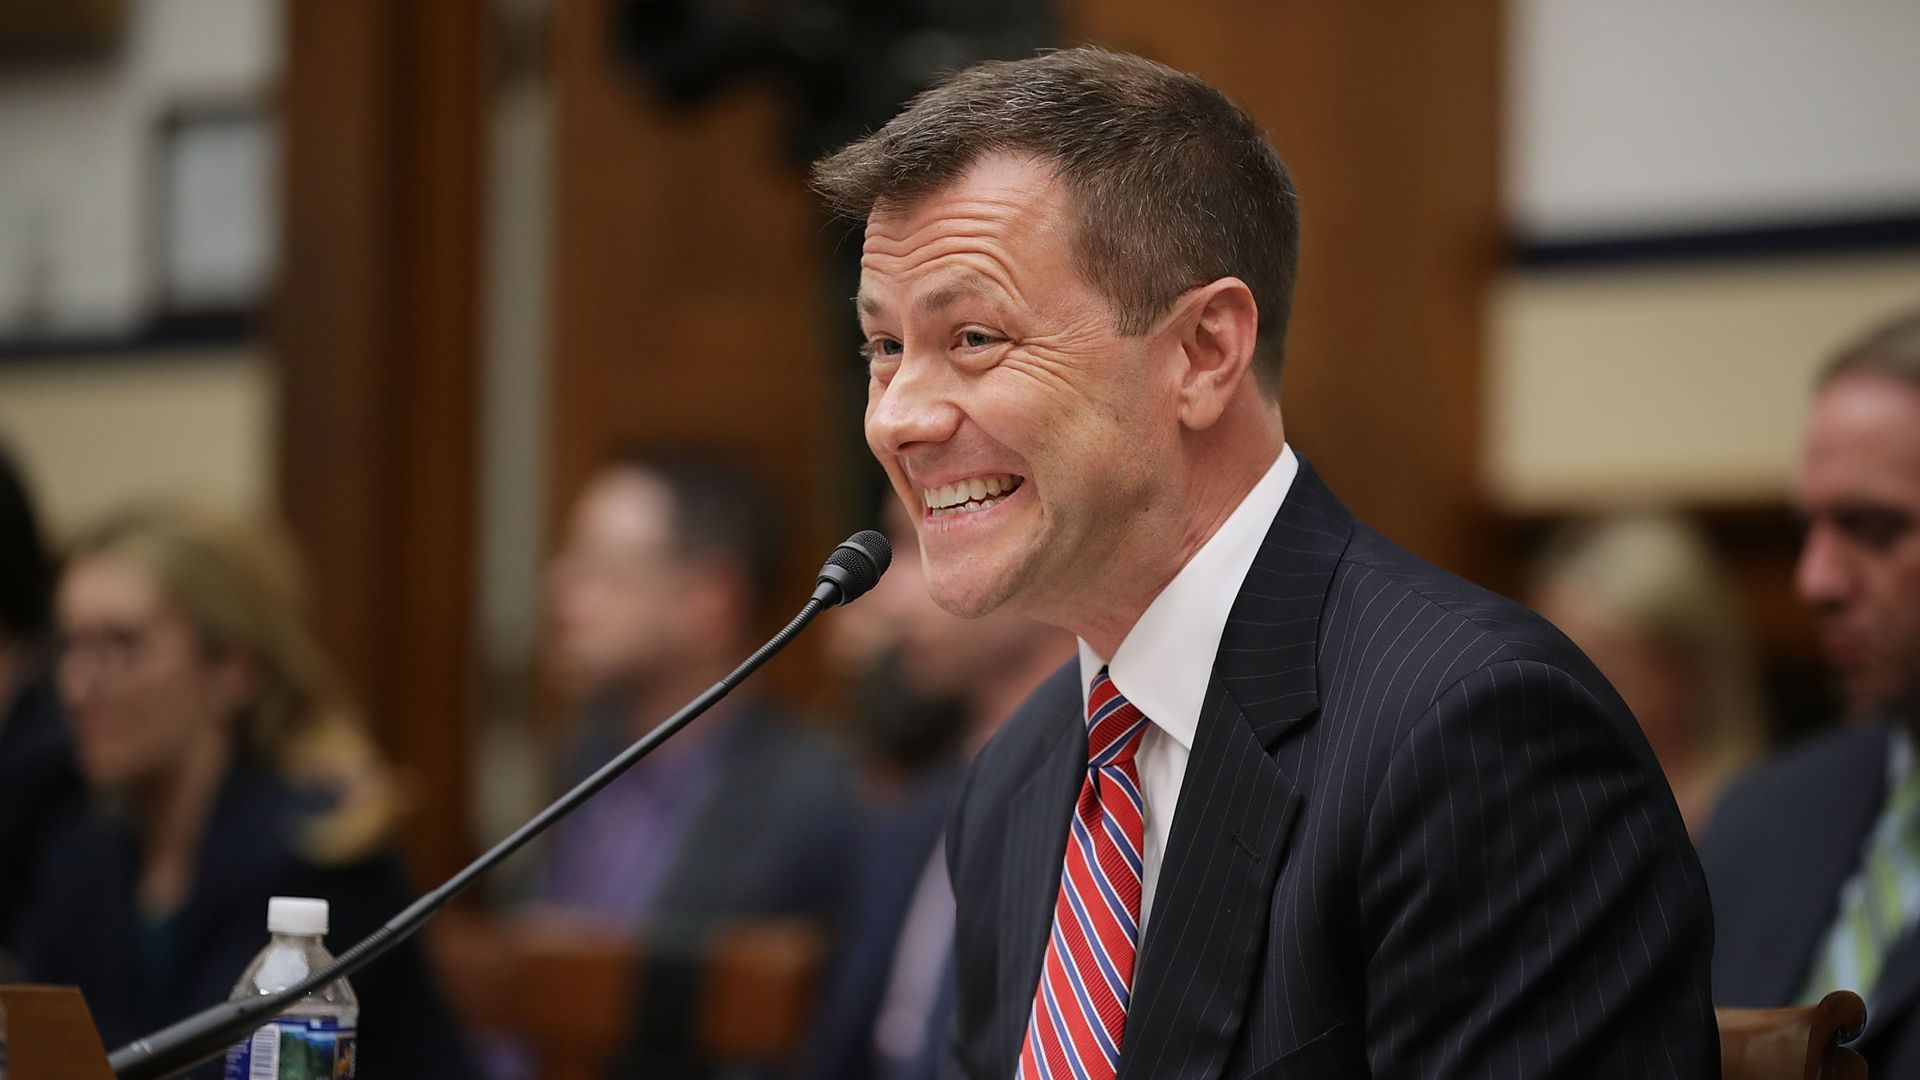 Peter Strzok testifying to Congress grimaces into a microphone